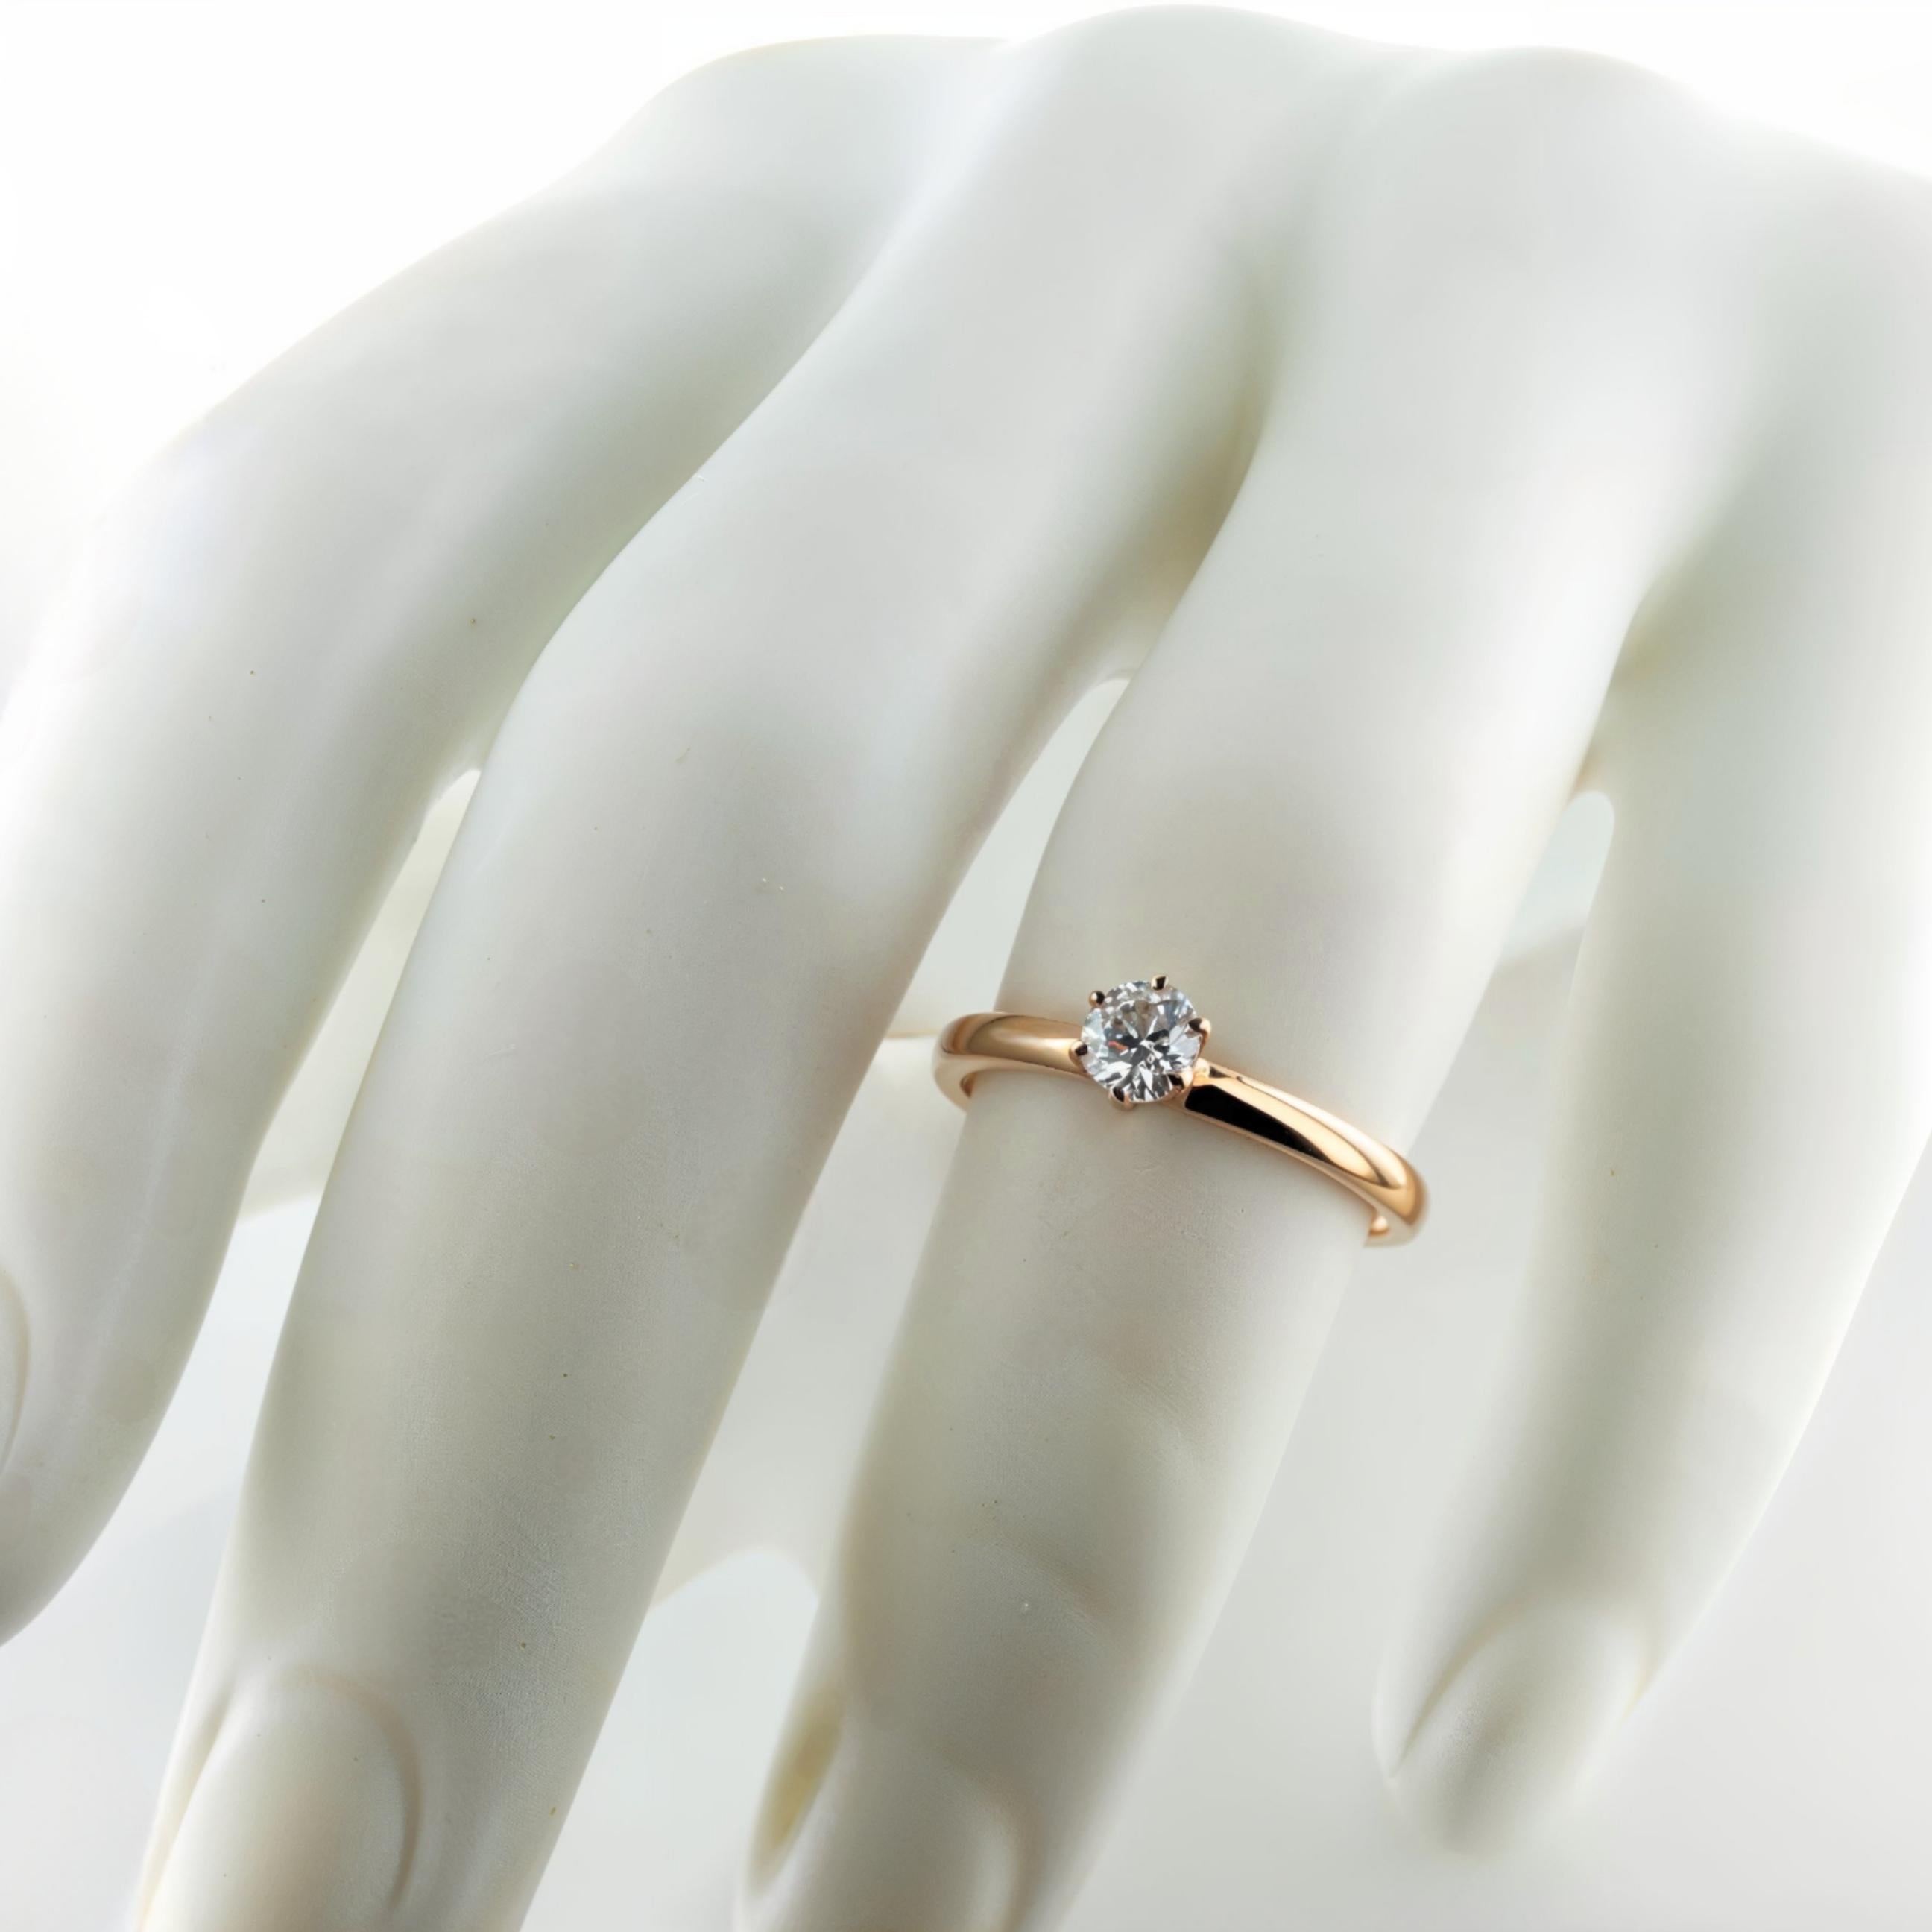 For Sale:  Stunning Classic 0.25 Carat Diamond Solitaire Ring in 14K Gold 11